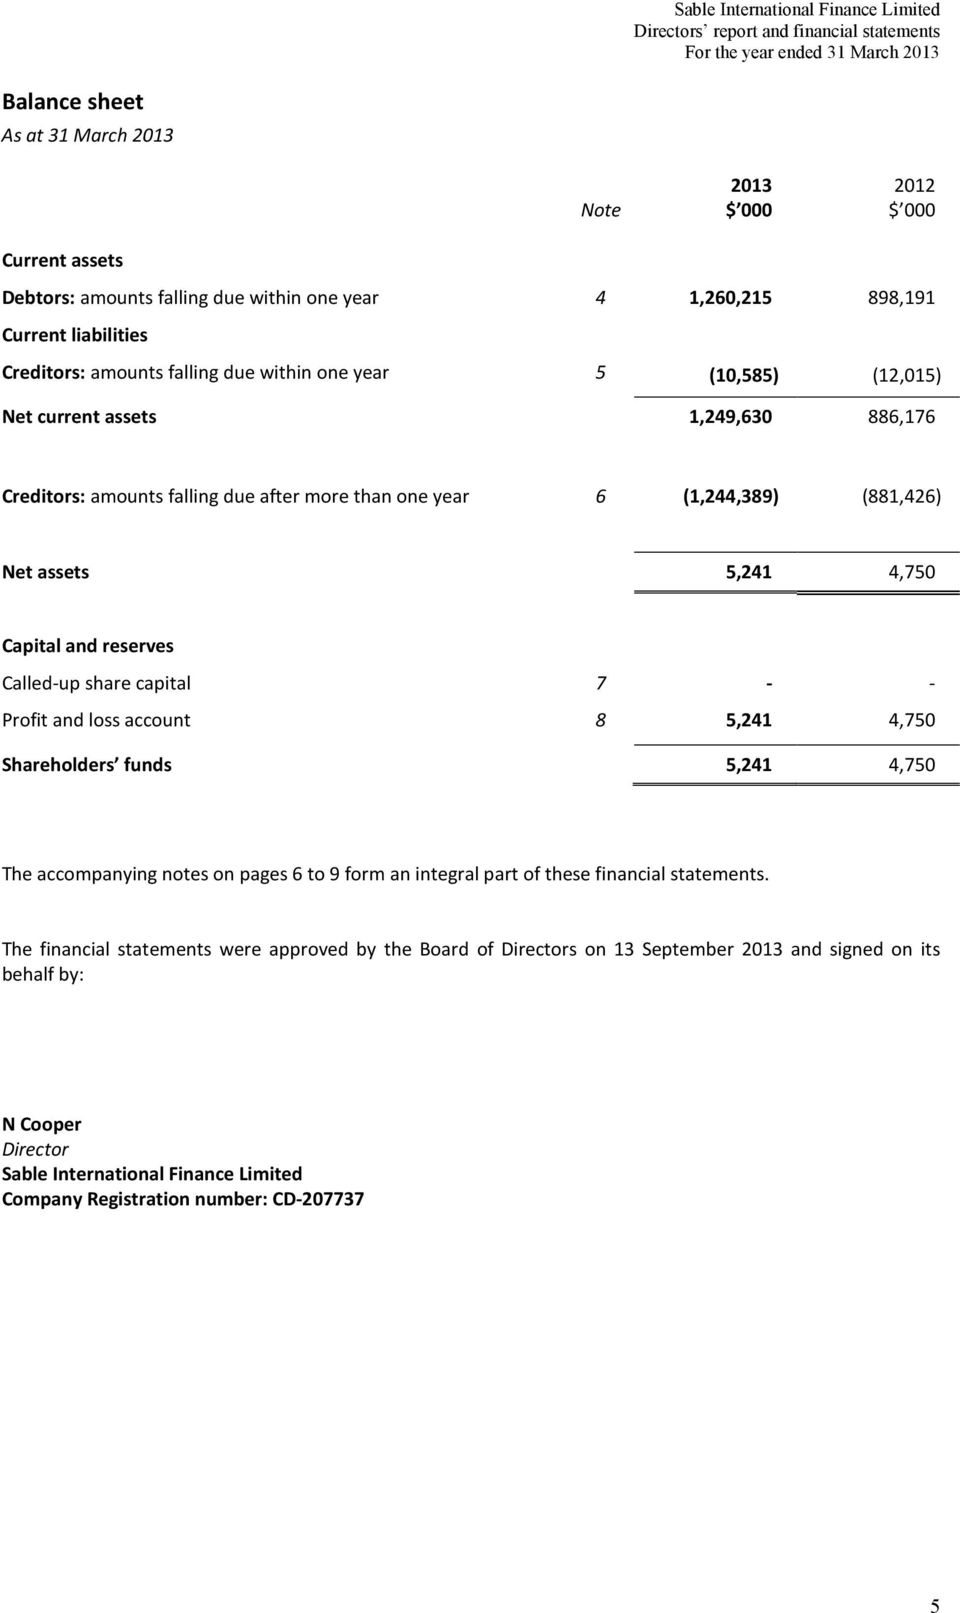 share capital 7 - - Profit and loss account 8 5,241 4,750 Shareholders funds 5,241 4,750 The accompanying notes on pages 6 to 9 form an integral part of these financial statements.